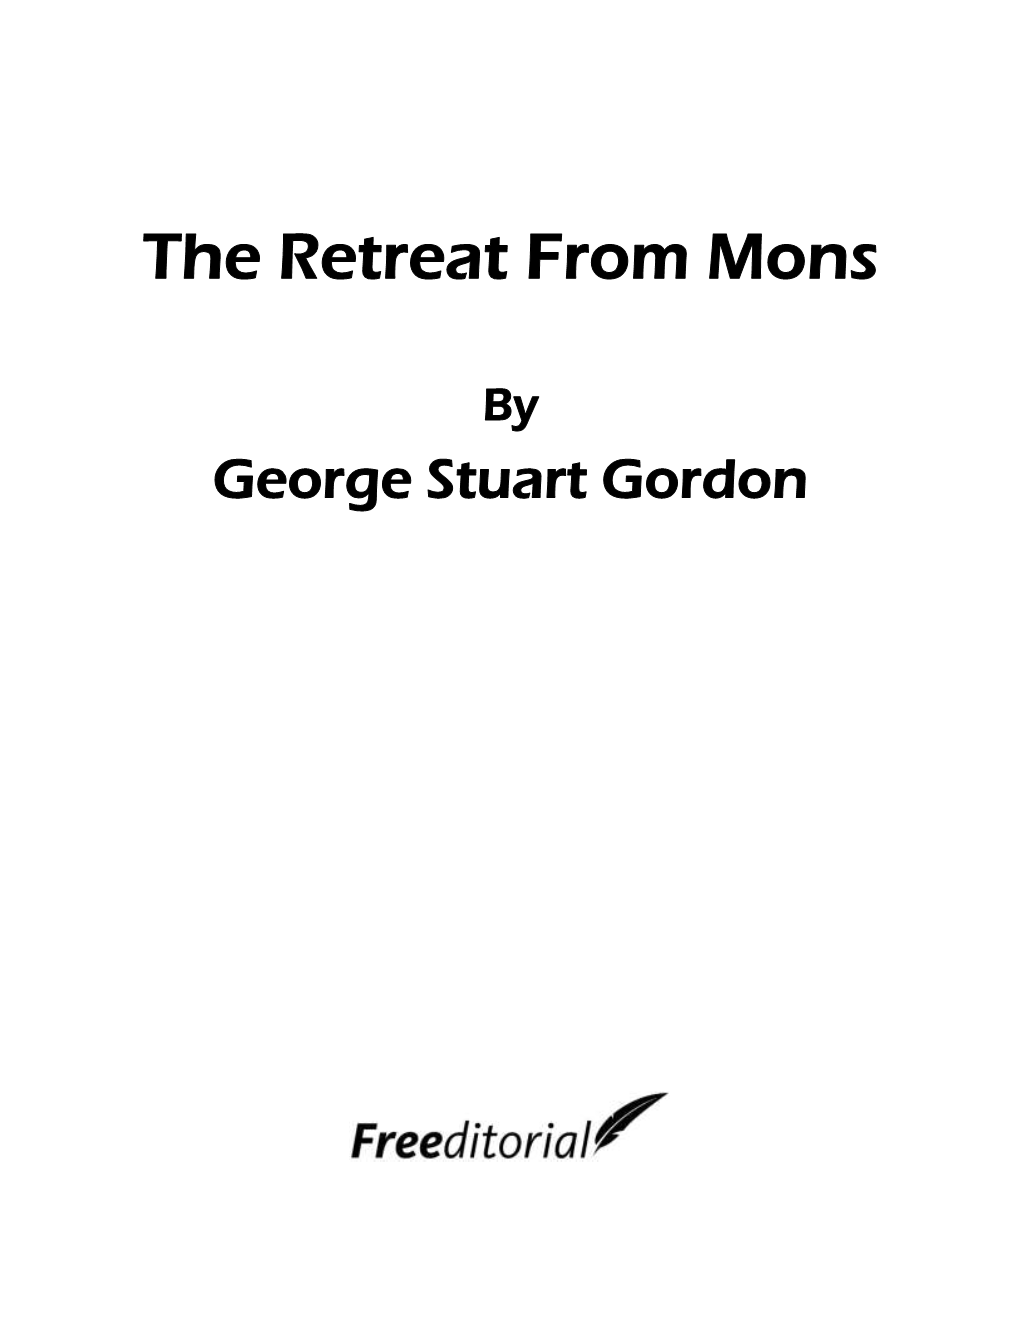 The Retreat from Mons